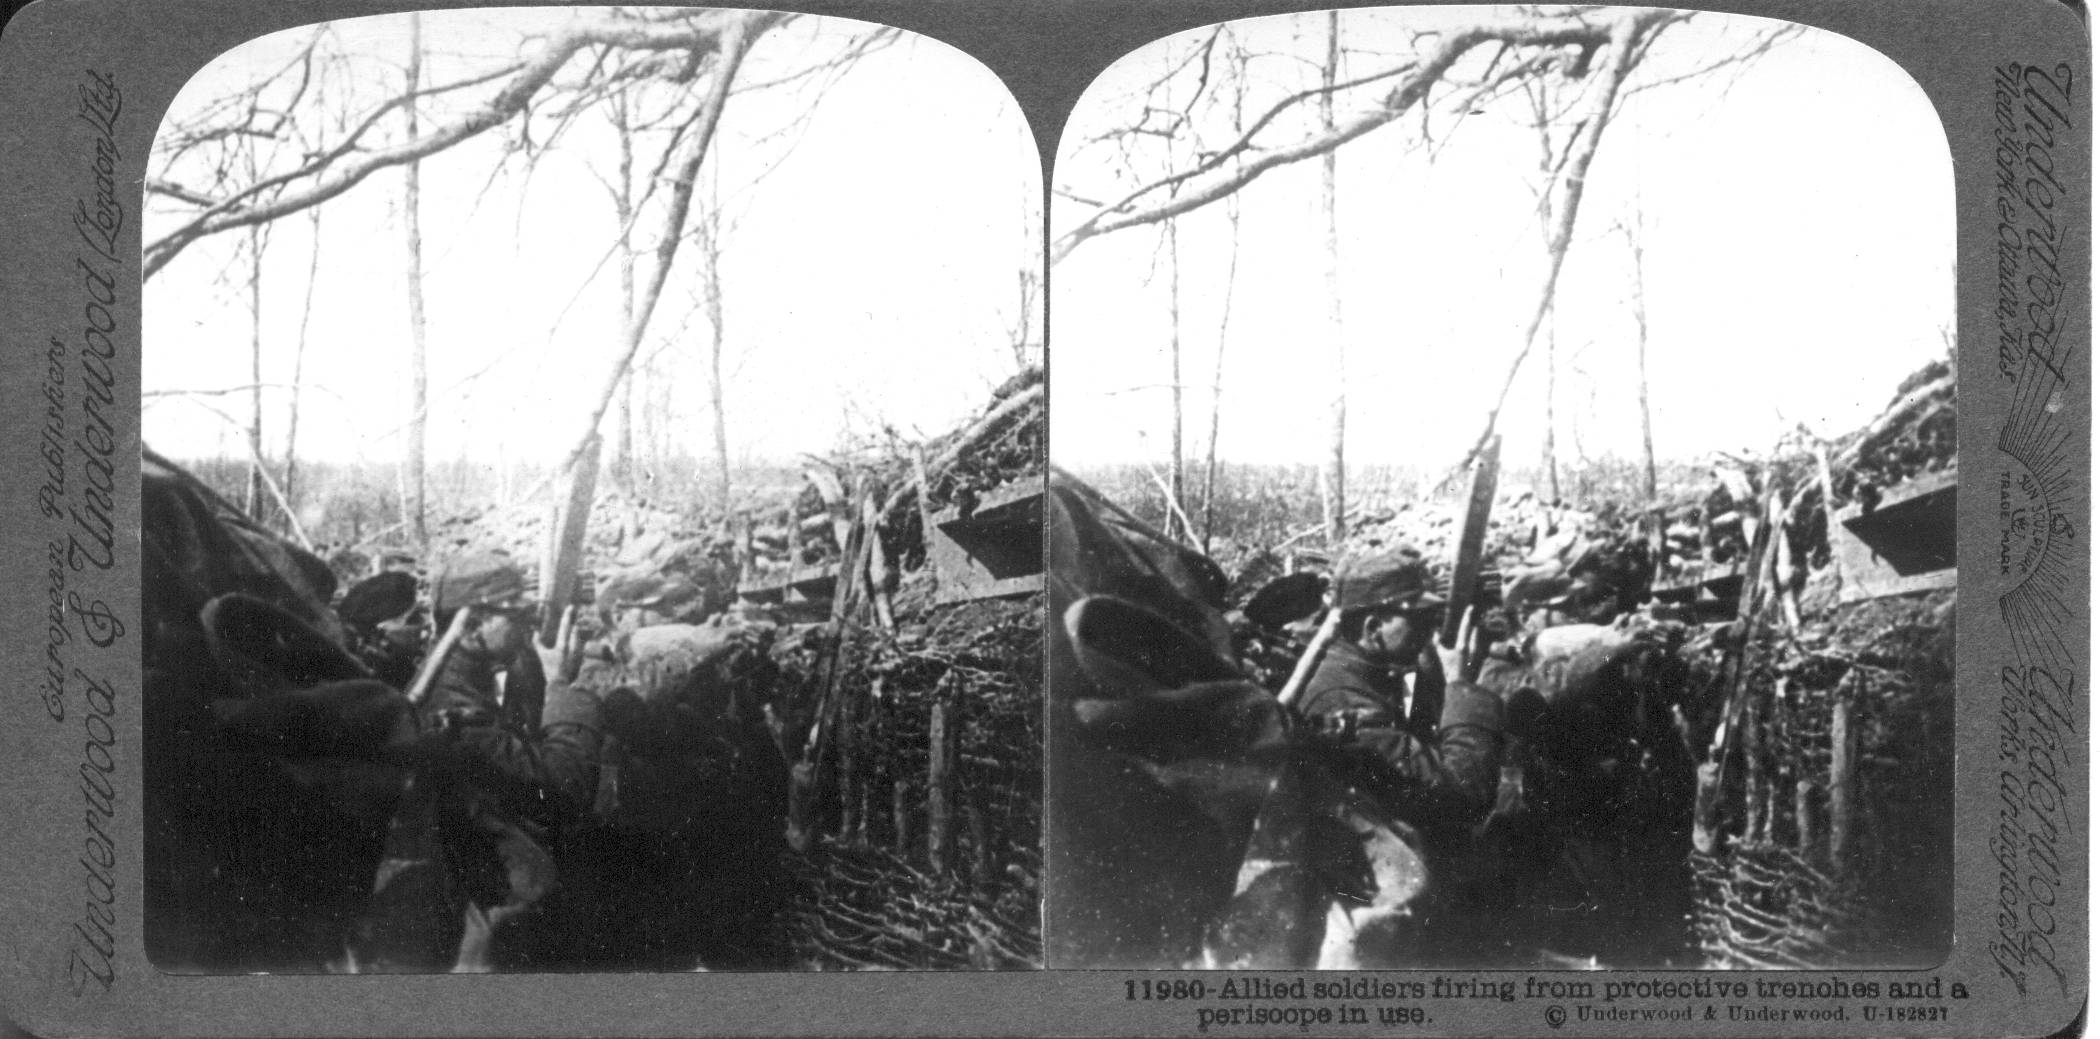 Allied soldiers firing from protective trenches and a periscope in use